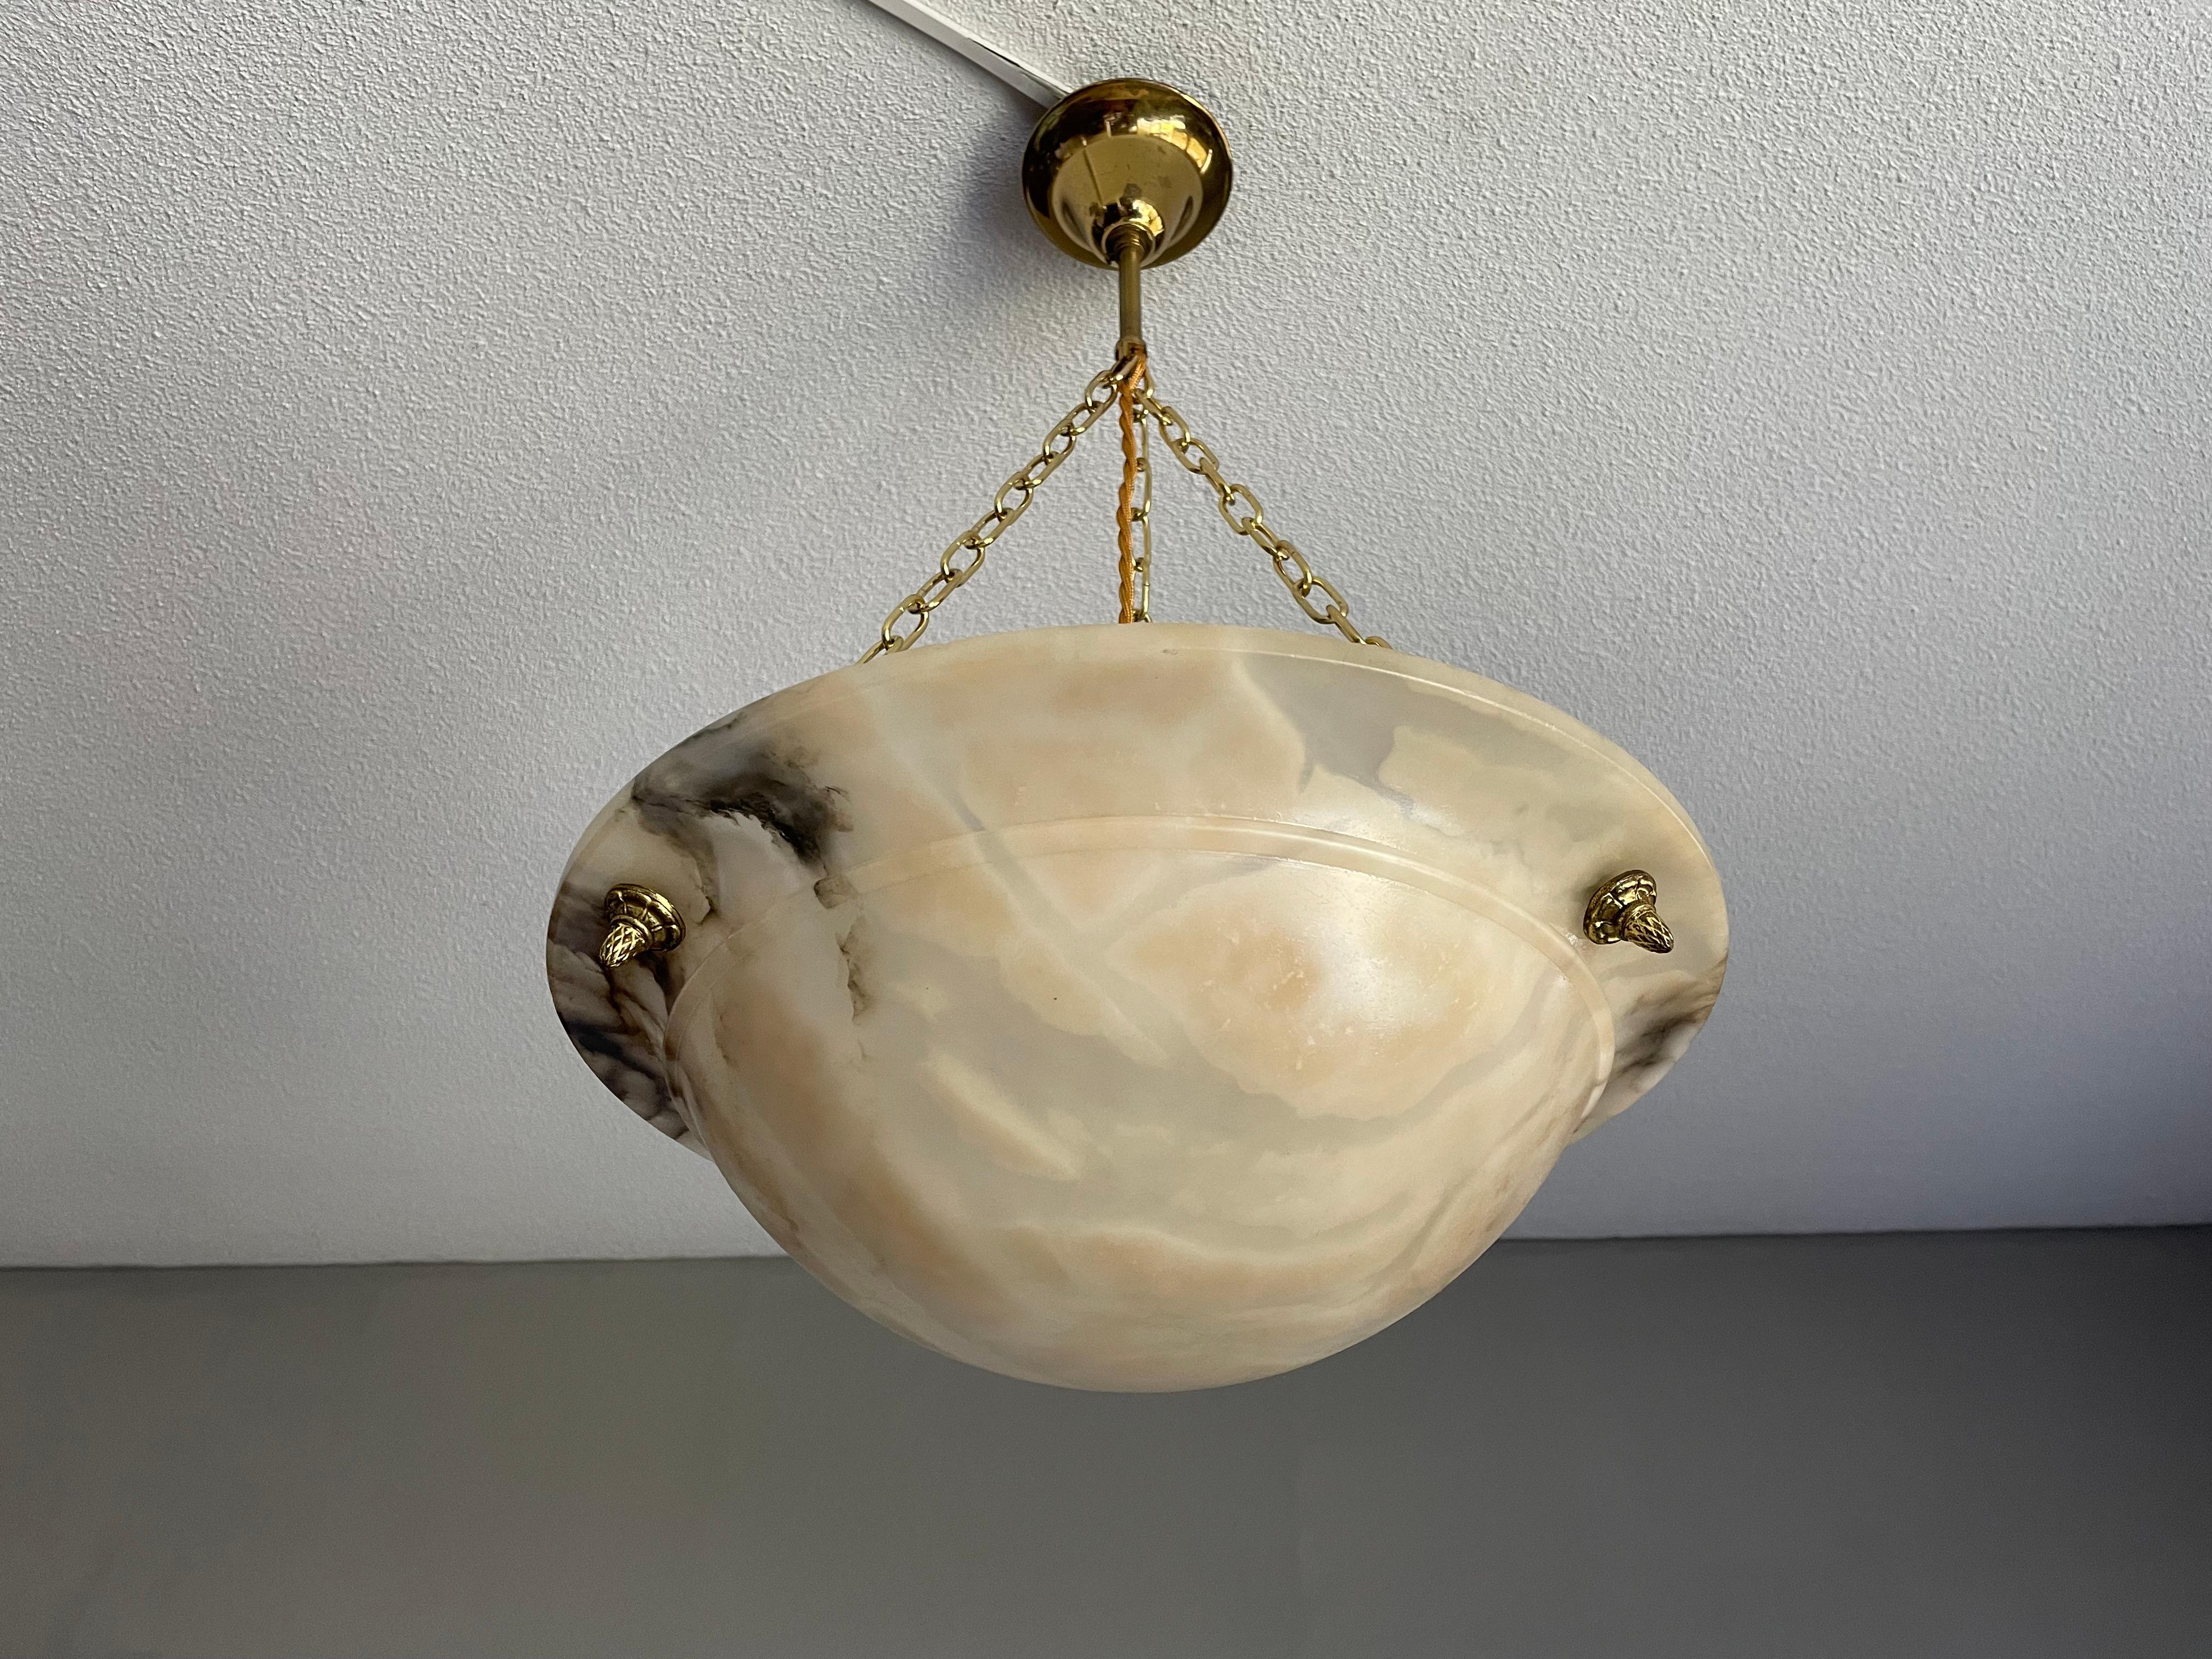 Bronzed Beautiful Antique Alabaster and Brass French Art Deco Pendant Light / Chandelier